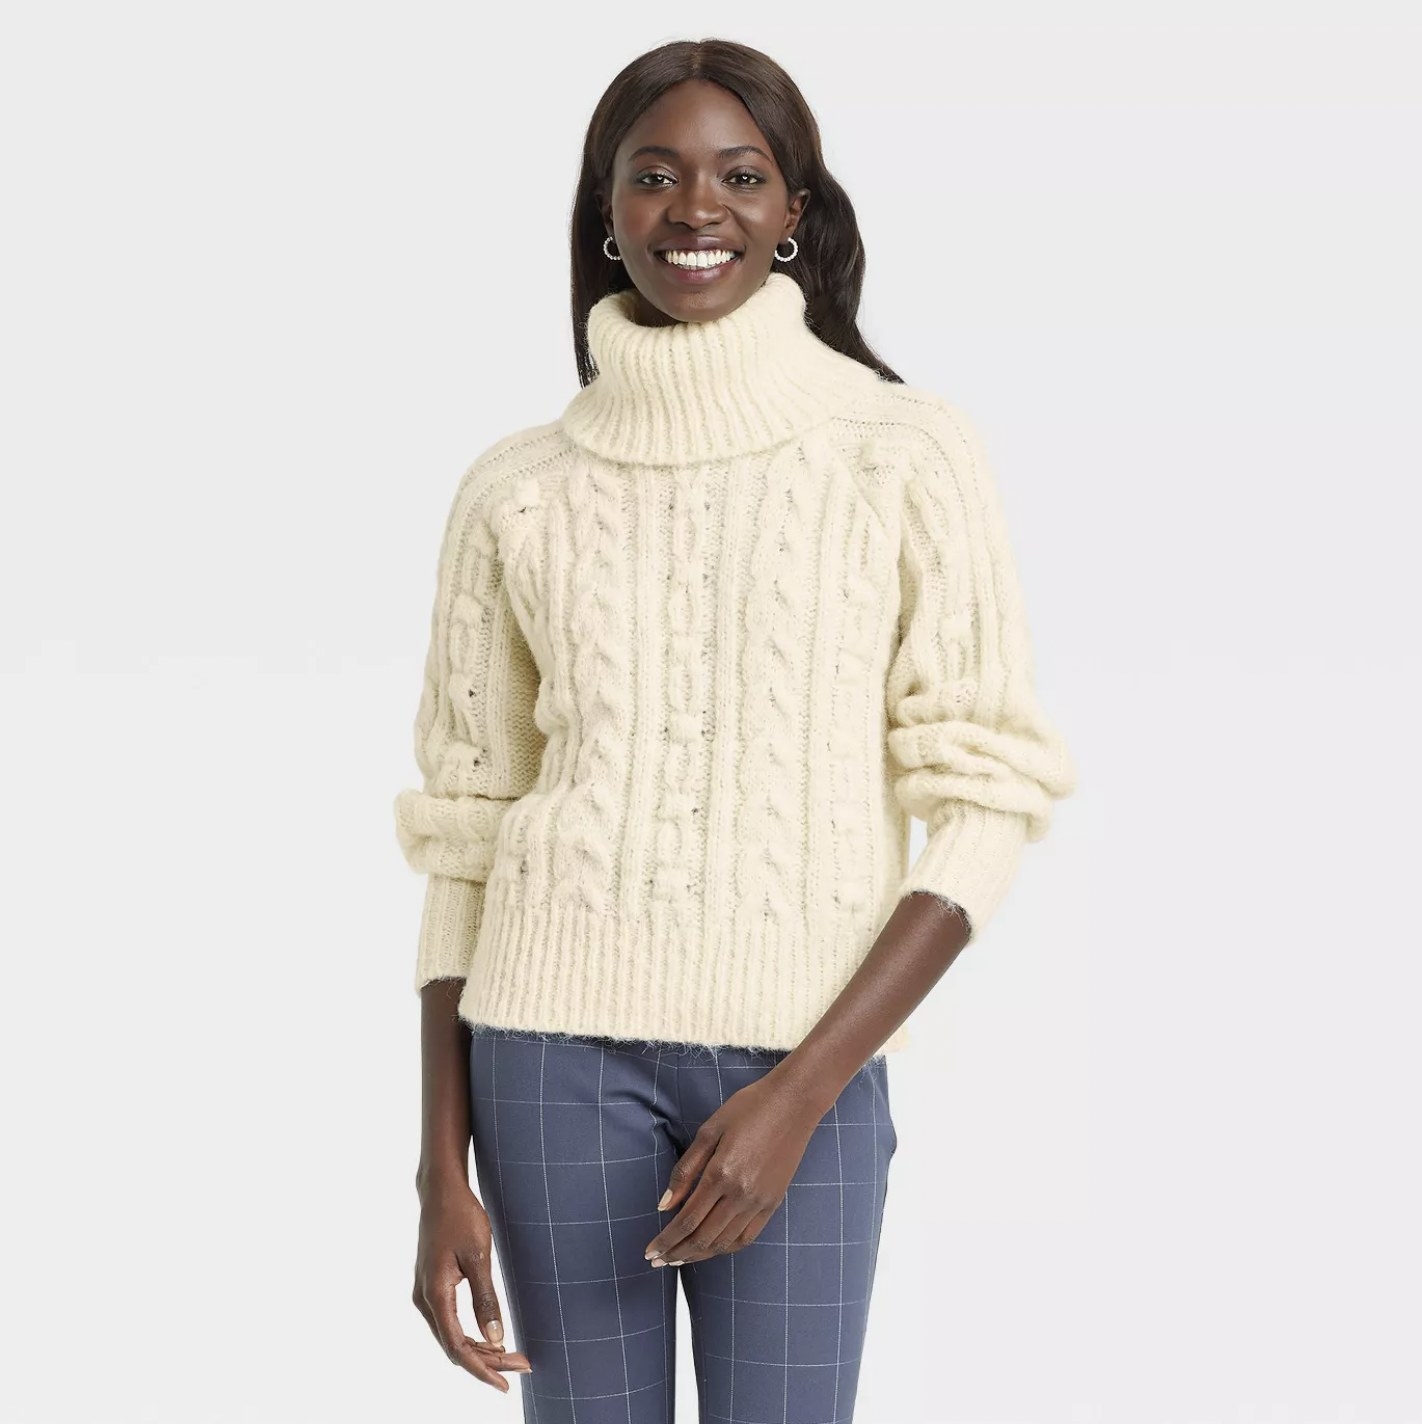 Model in the cream-colored mock turtleneck sweater